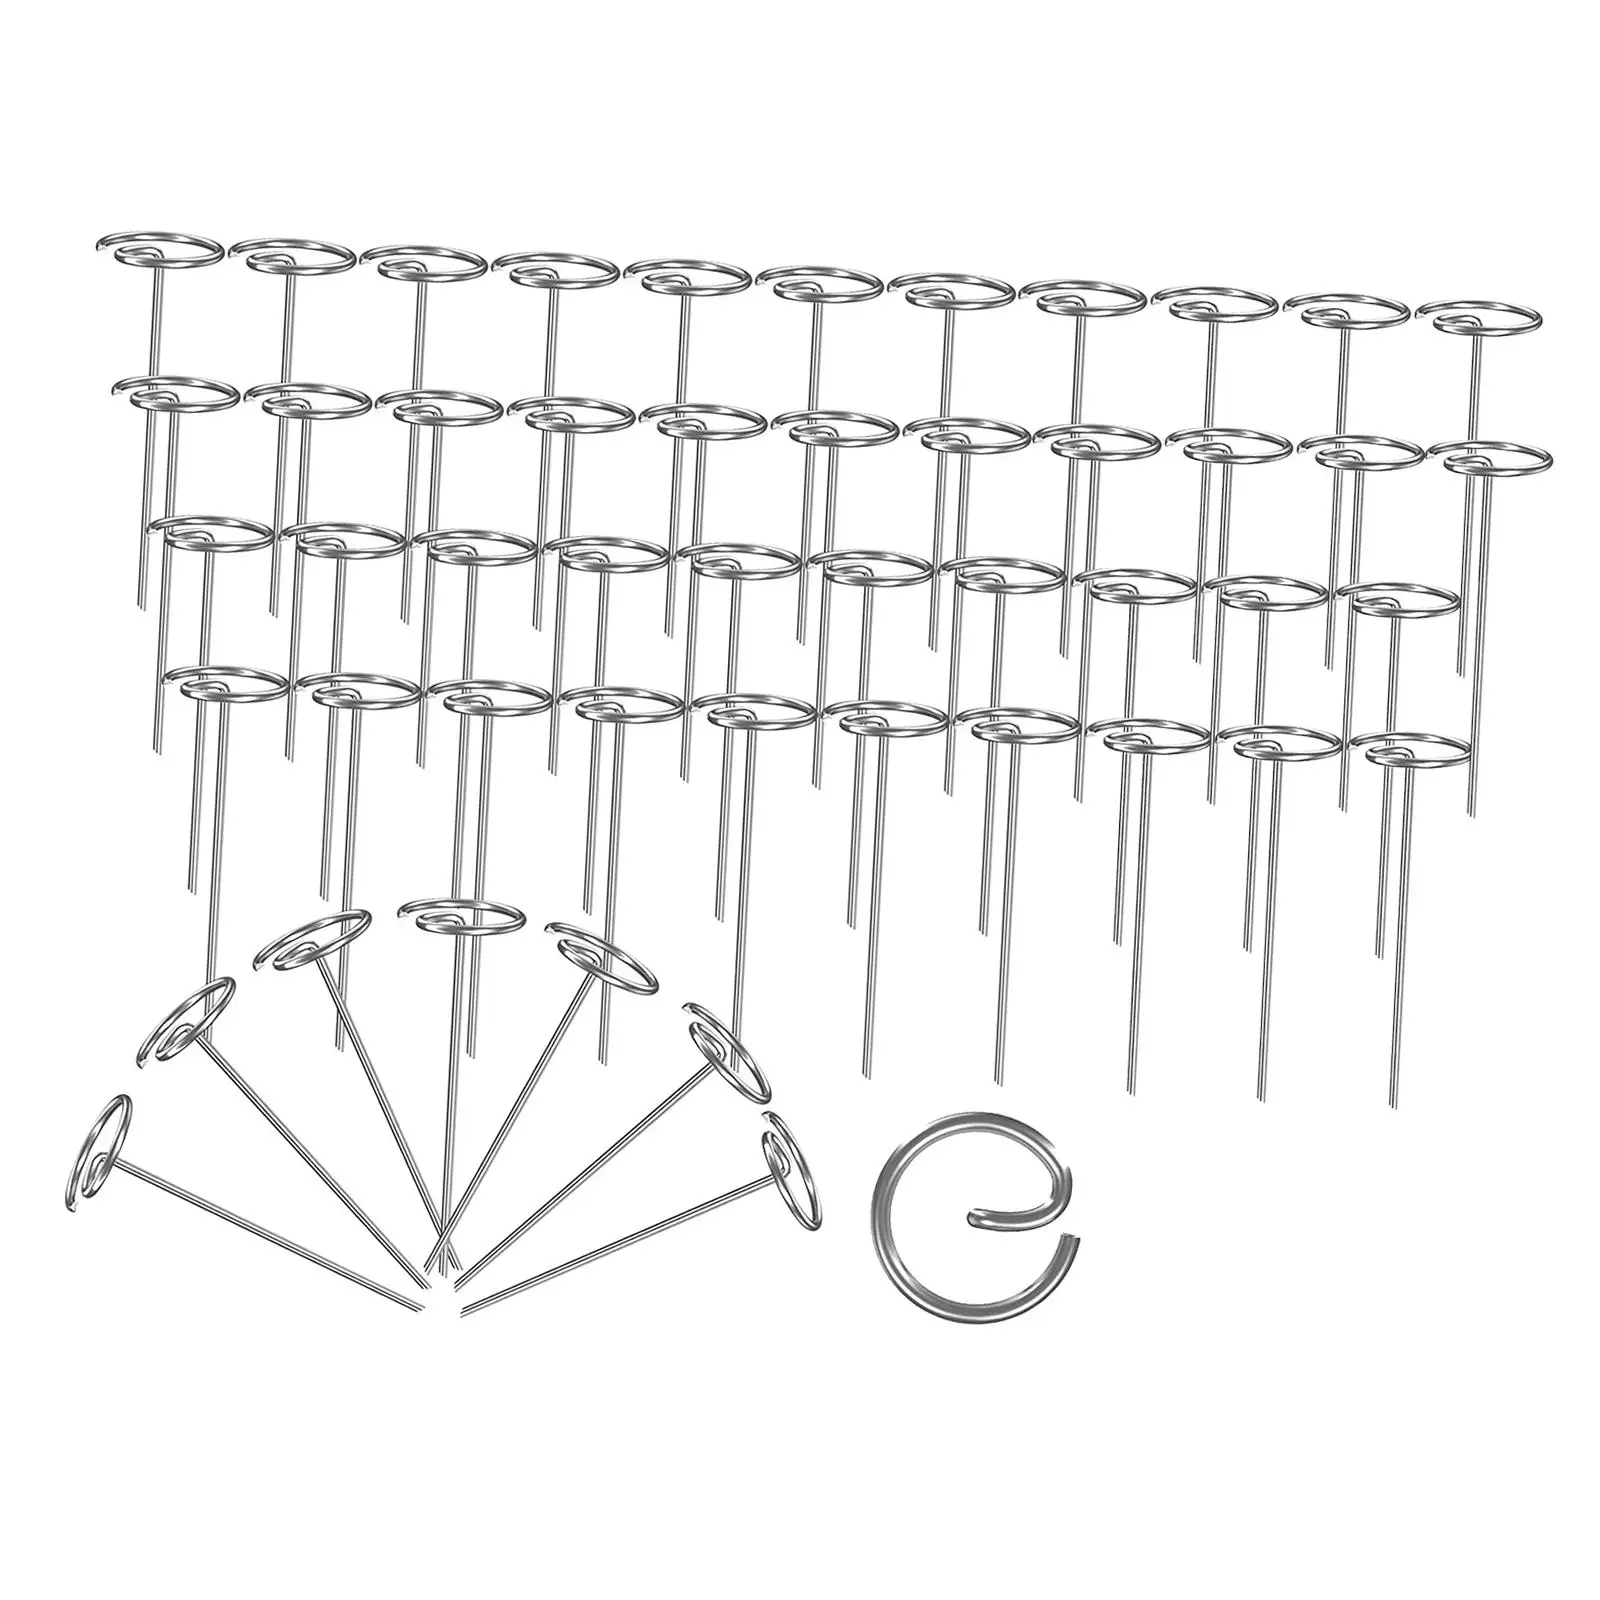 50 Pieces Circle Top Pins 4 inch Landscape Staples Membrane Pegs Heavy Duty Landscape Pins sod Staples for Barrier Yard Outdoor